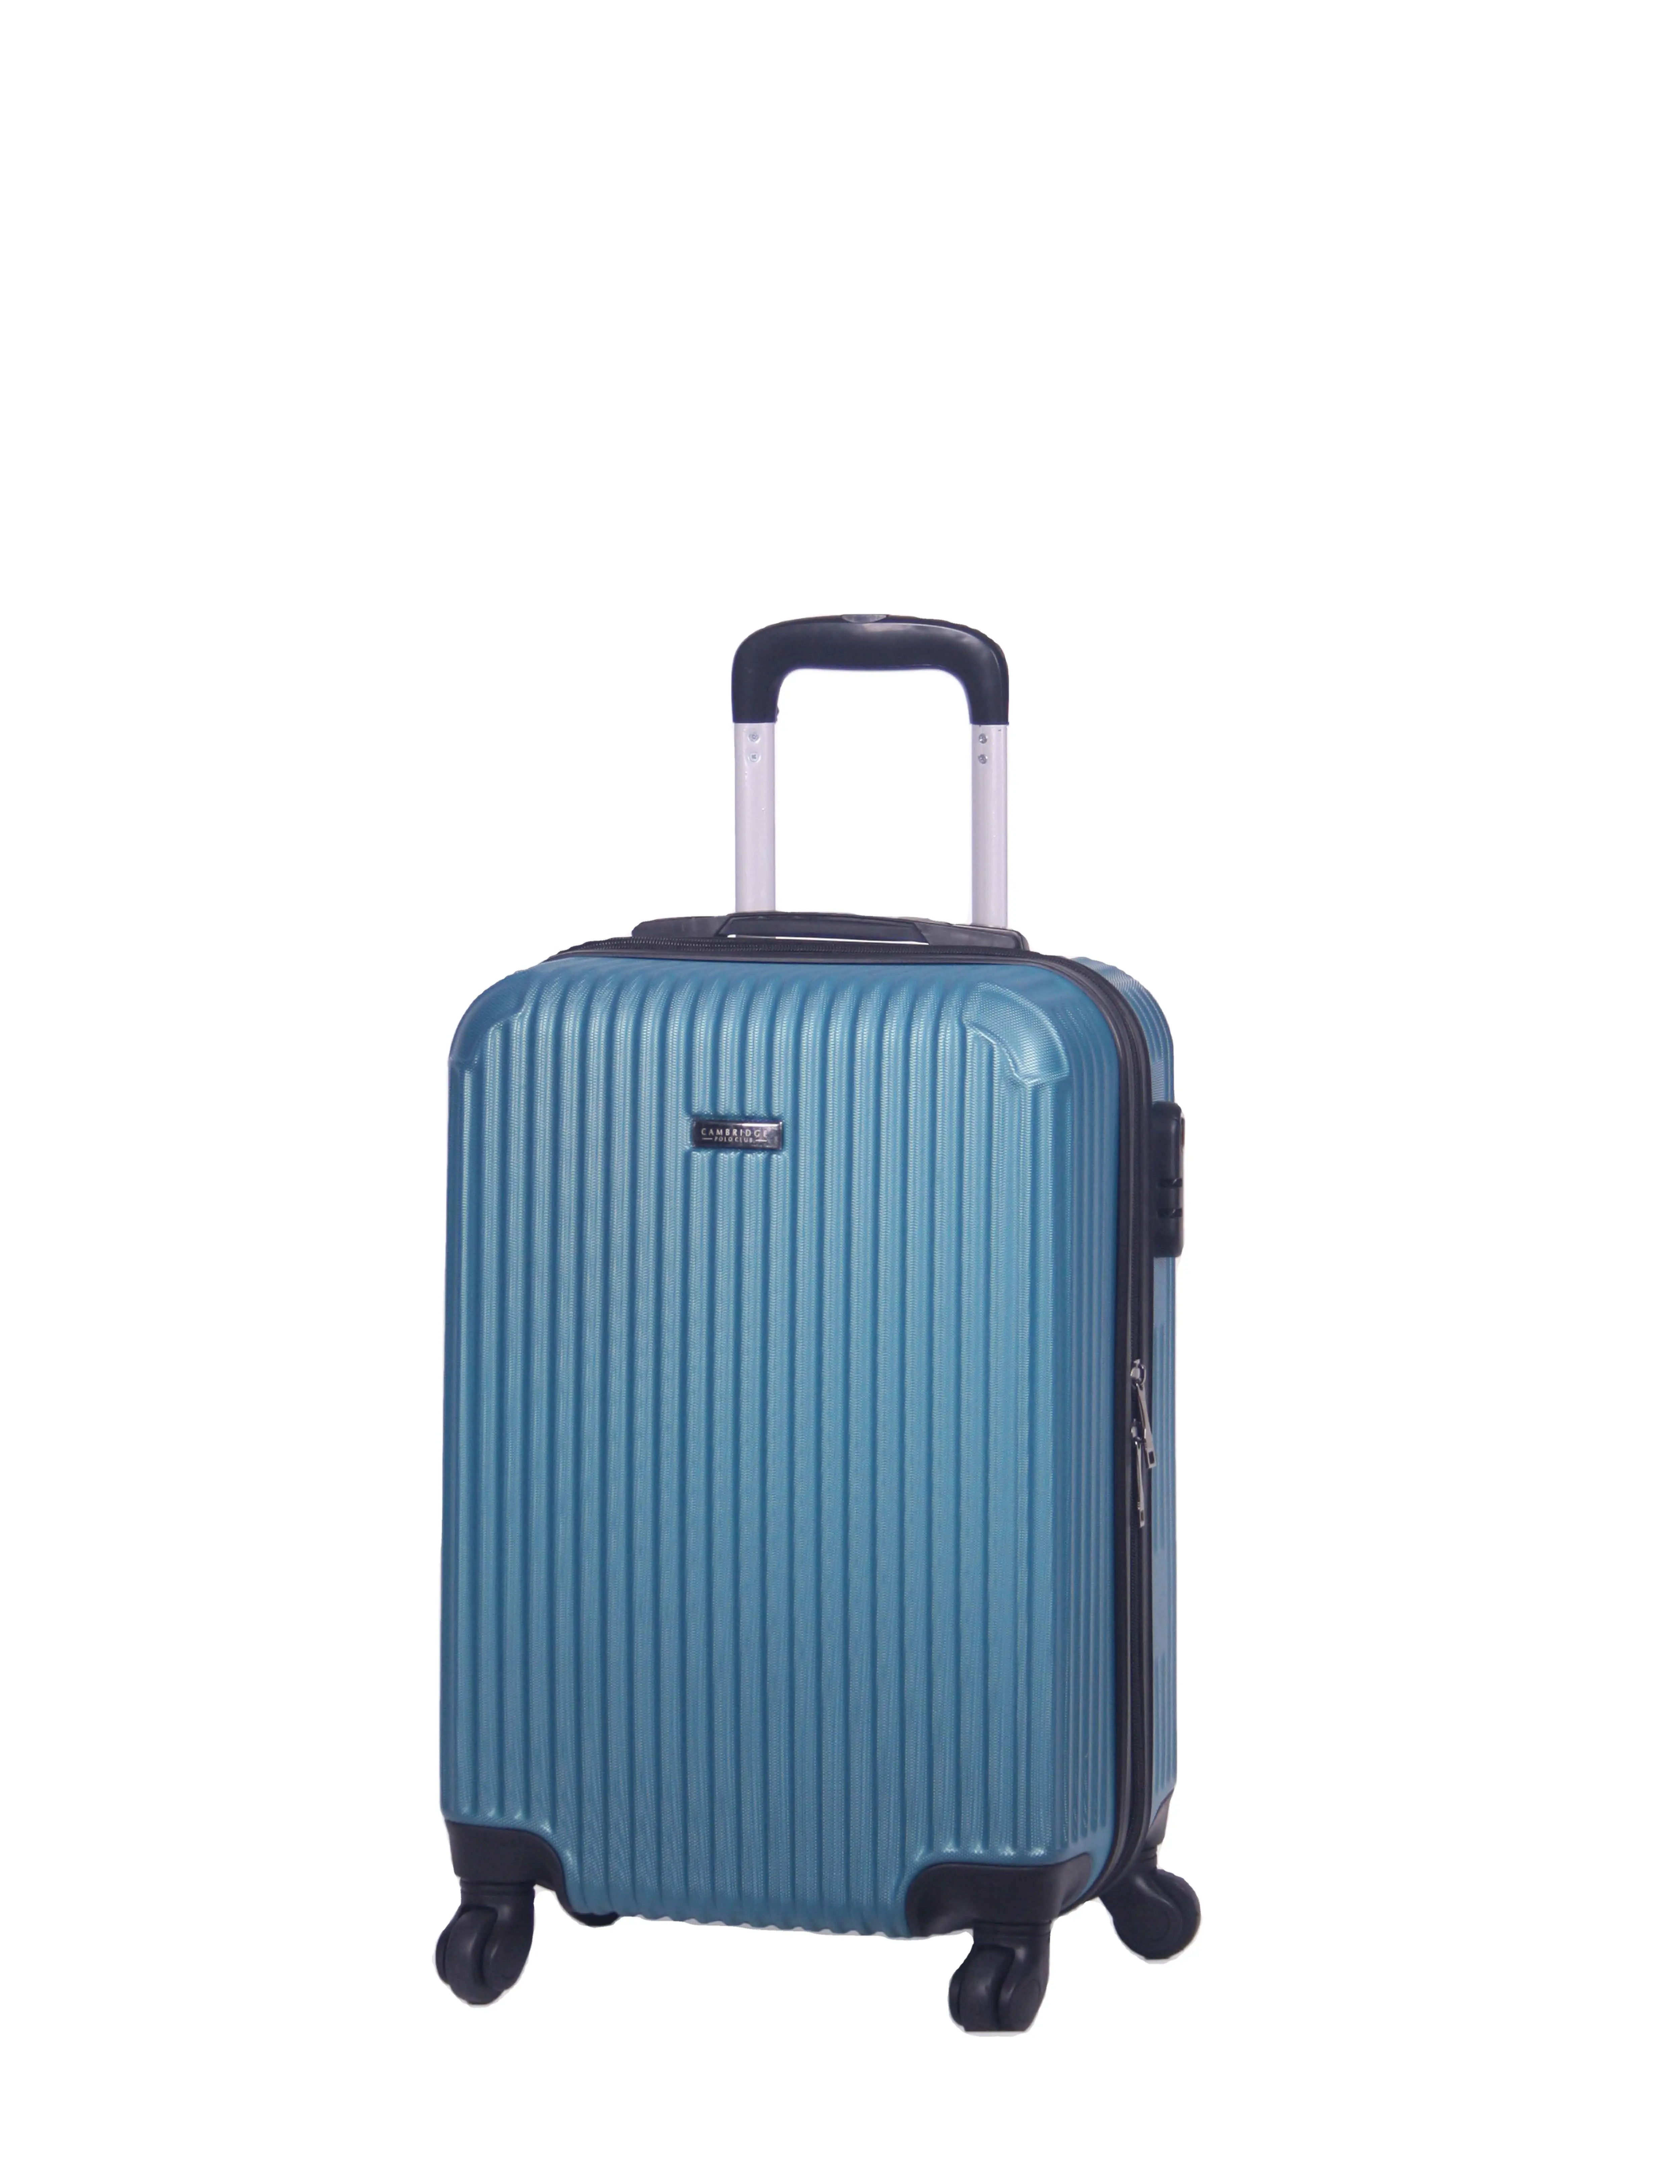 ABS 360 Degree Wheels Trolley Travel MADE IN TURKEY Suitcase Sets Hard Shell Luggage Valise Koffer Equipaje